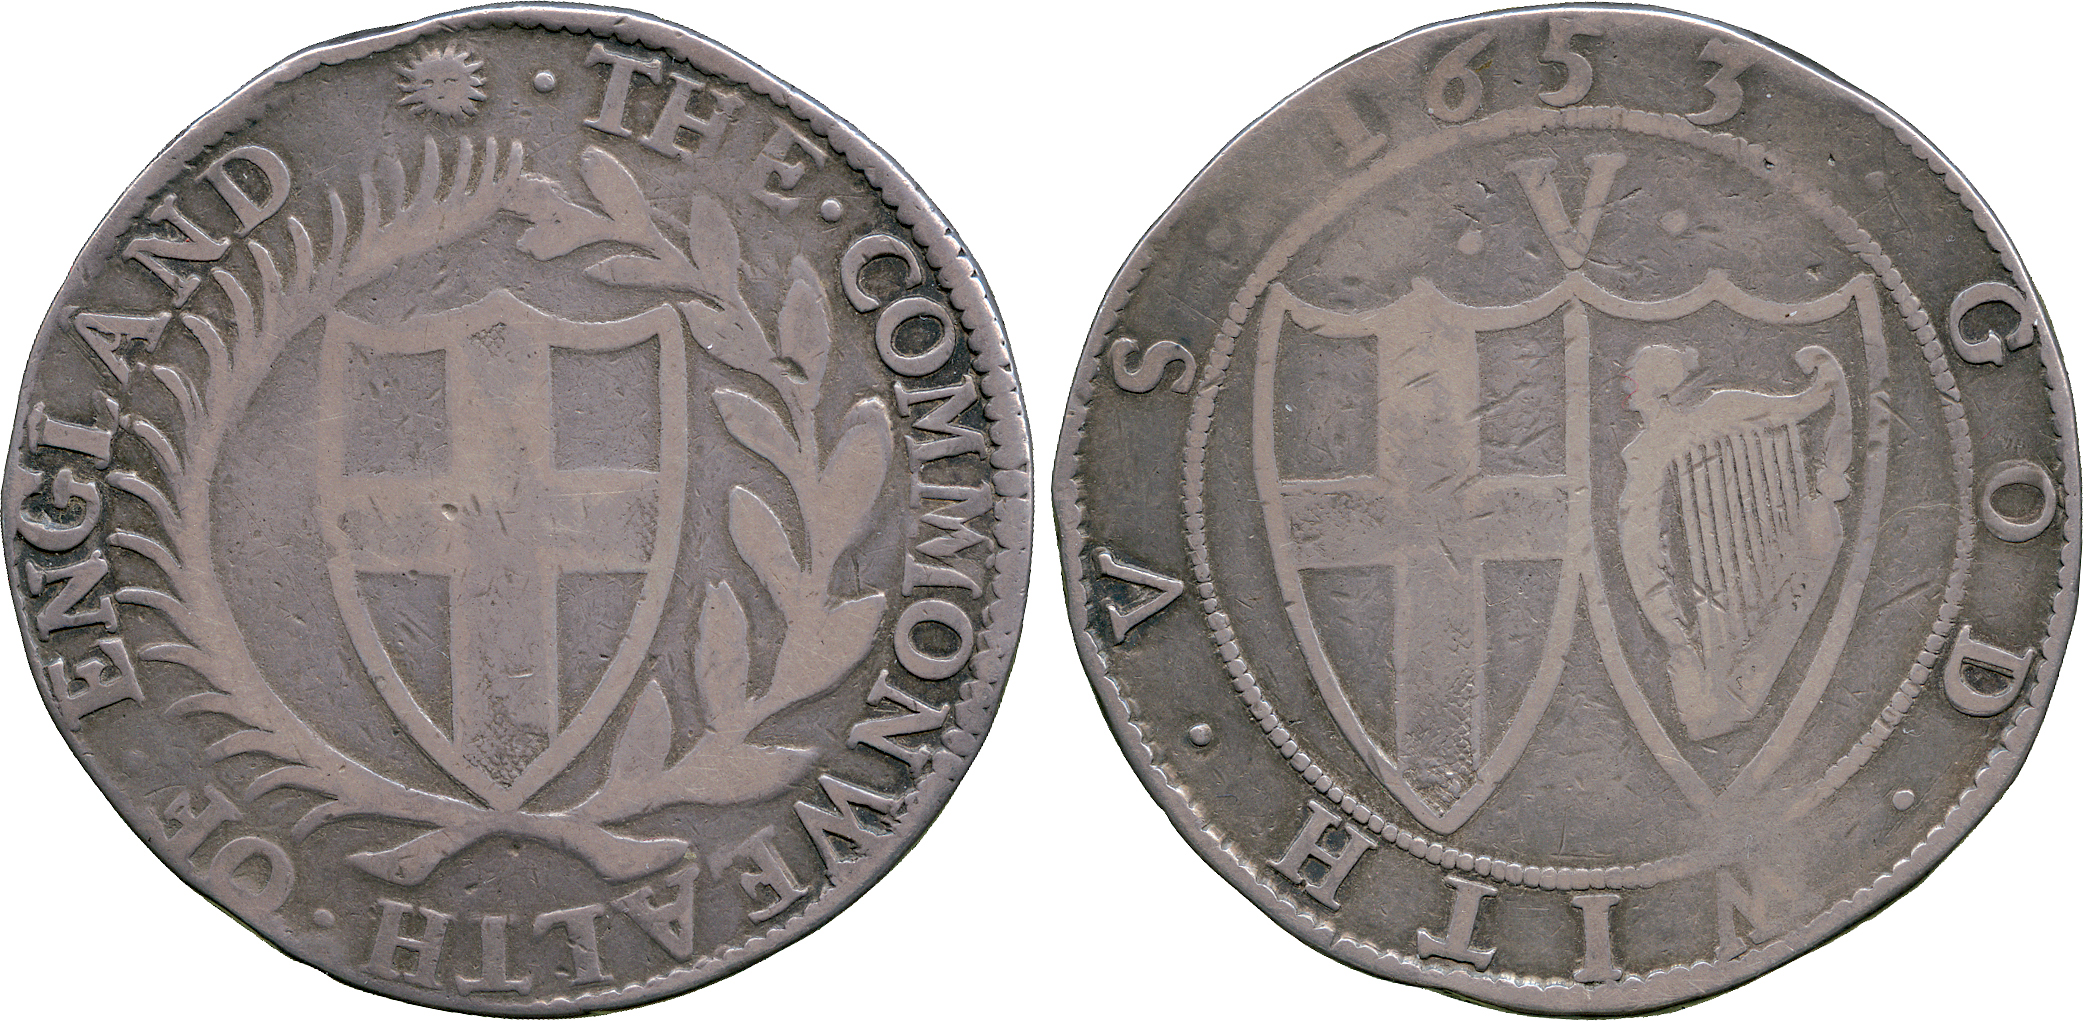 BRITISH COINS, Commonwealth (1649-1660), Silver Crown, 1653, inverted A for V in legend, English